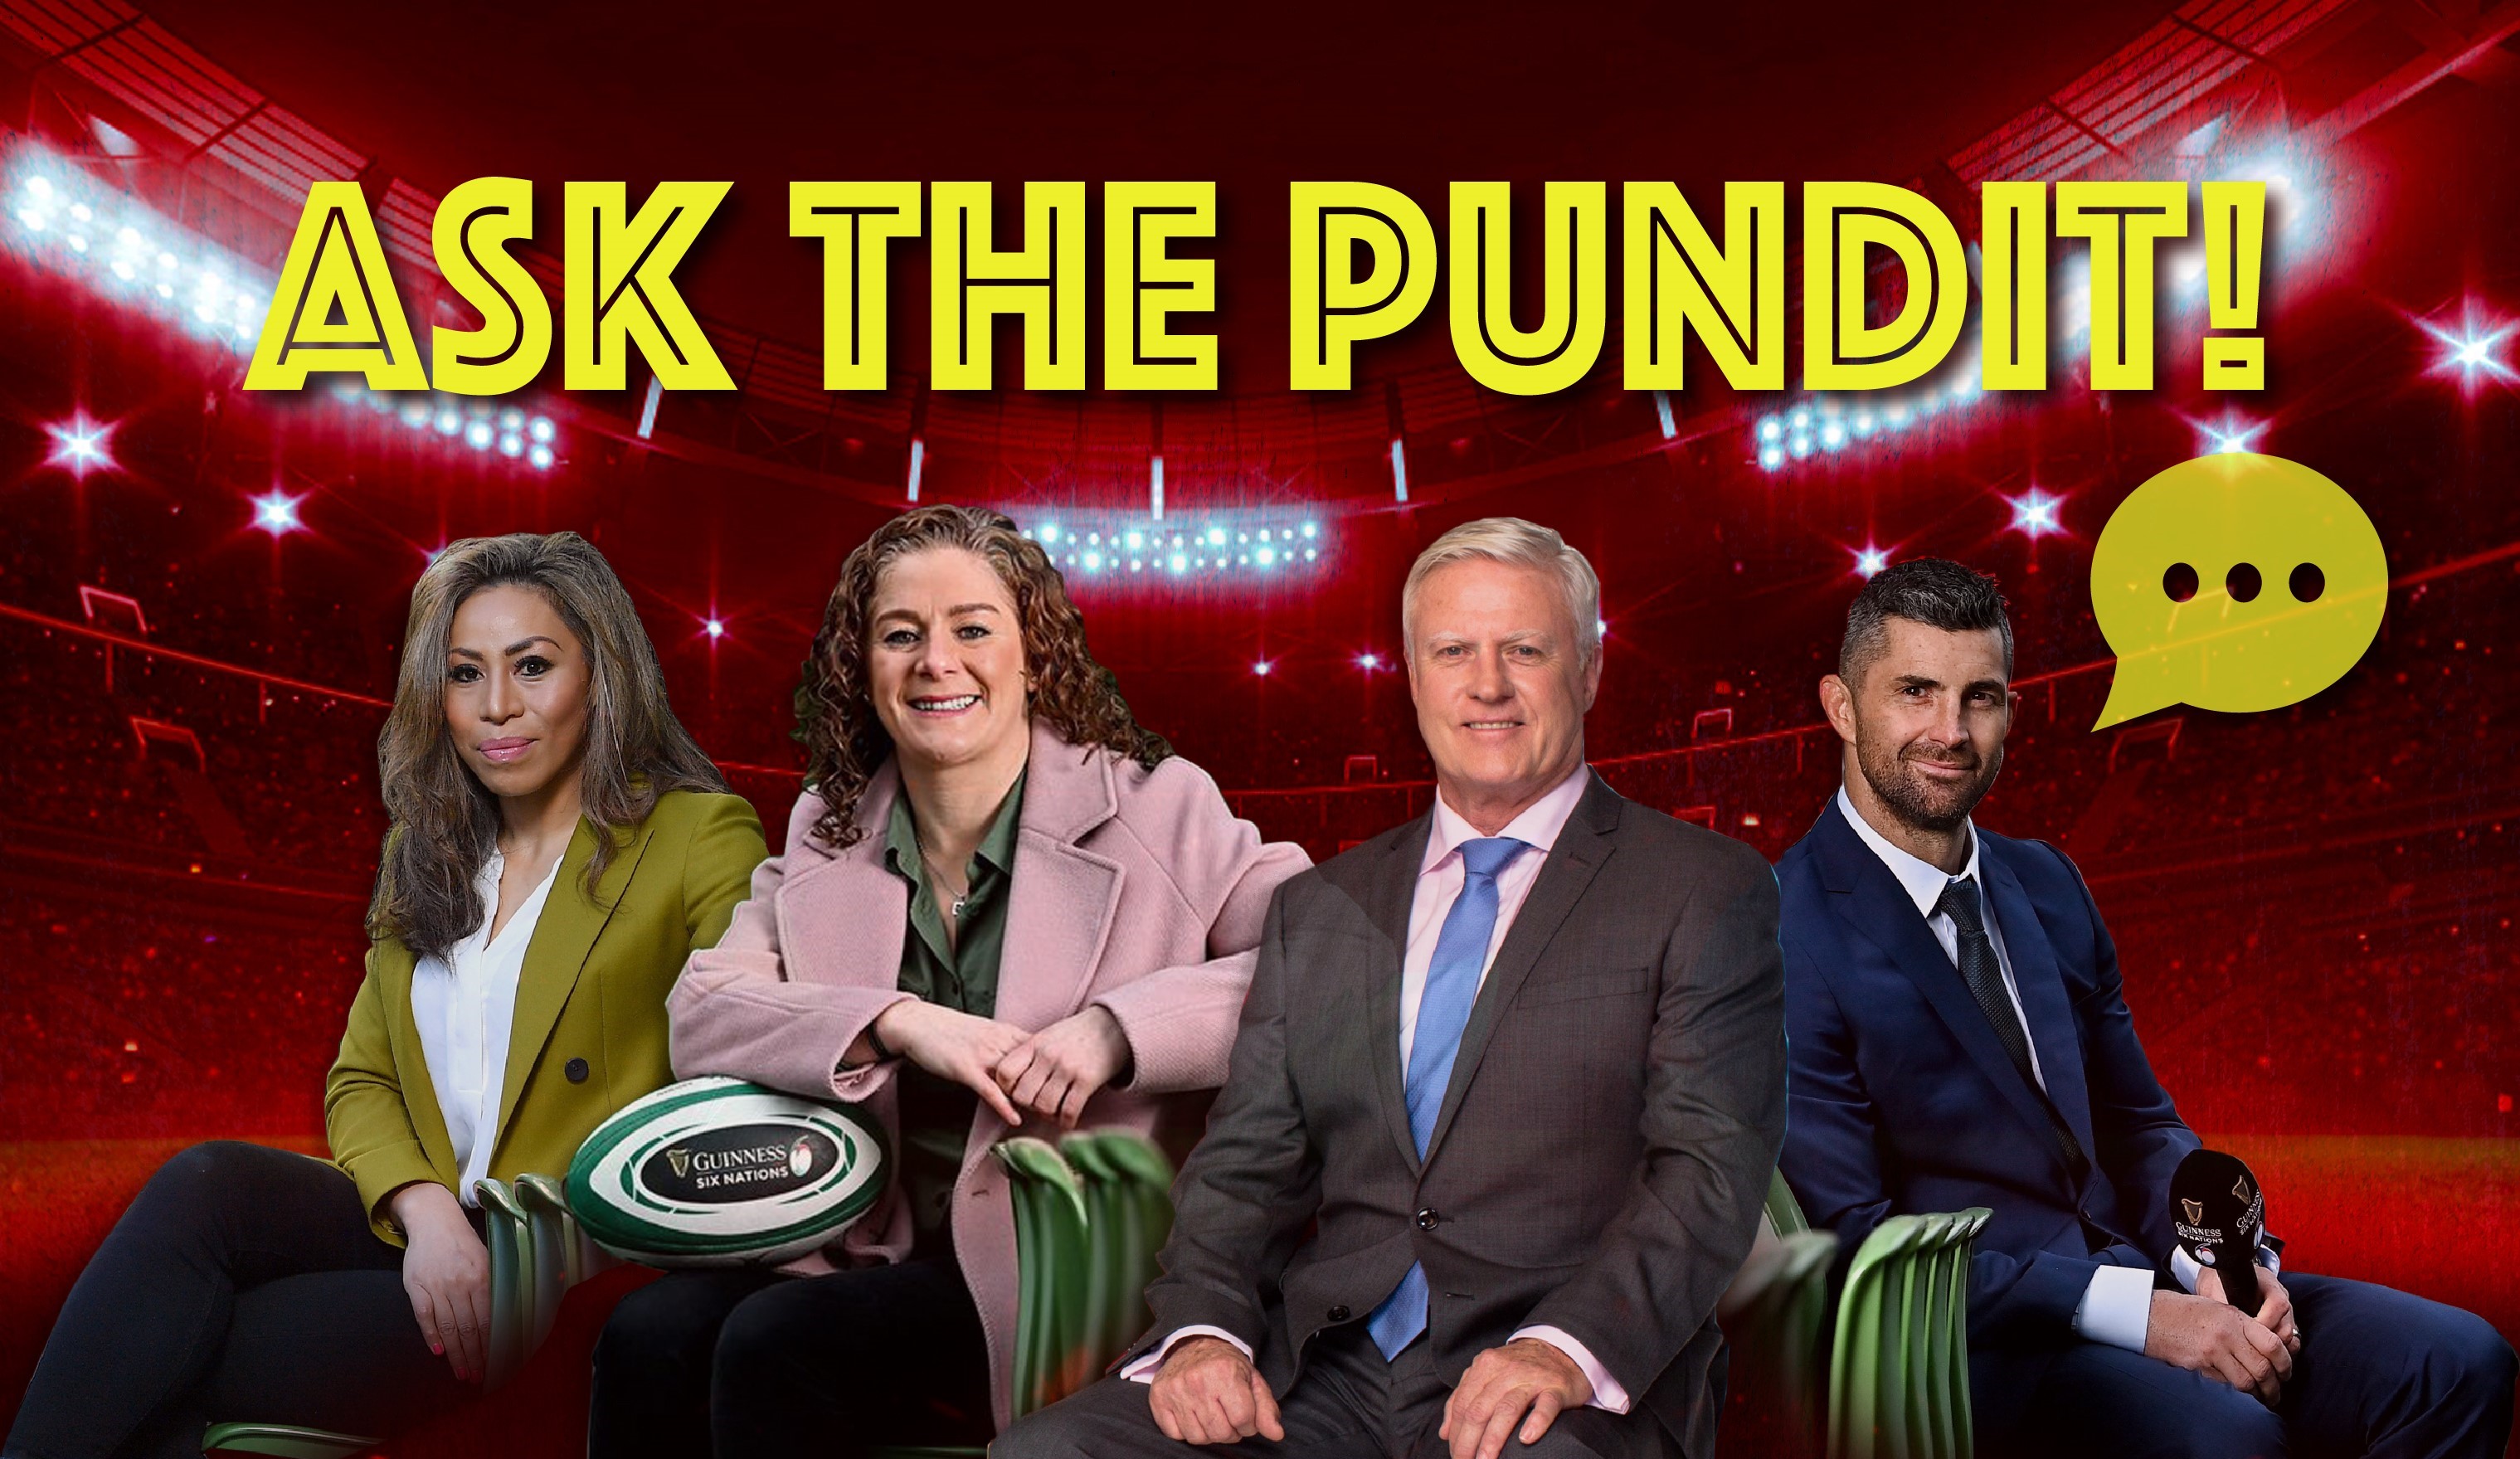 Ask the Pundit! And the winner is...